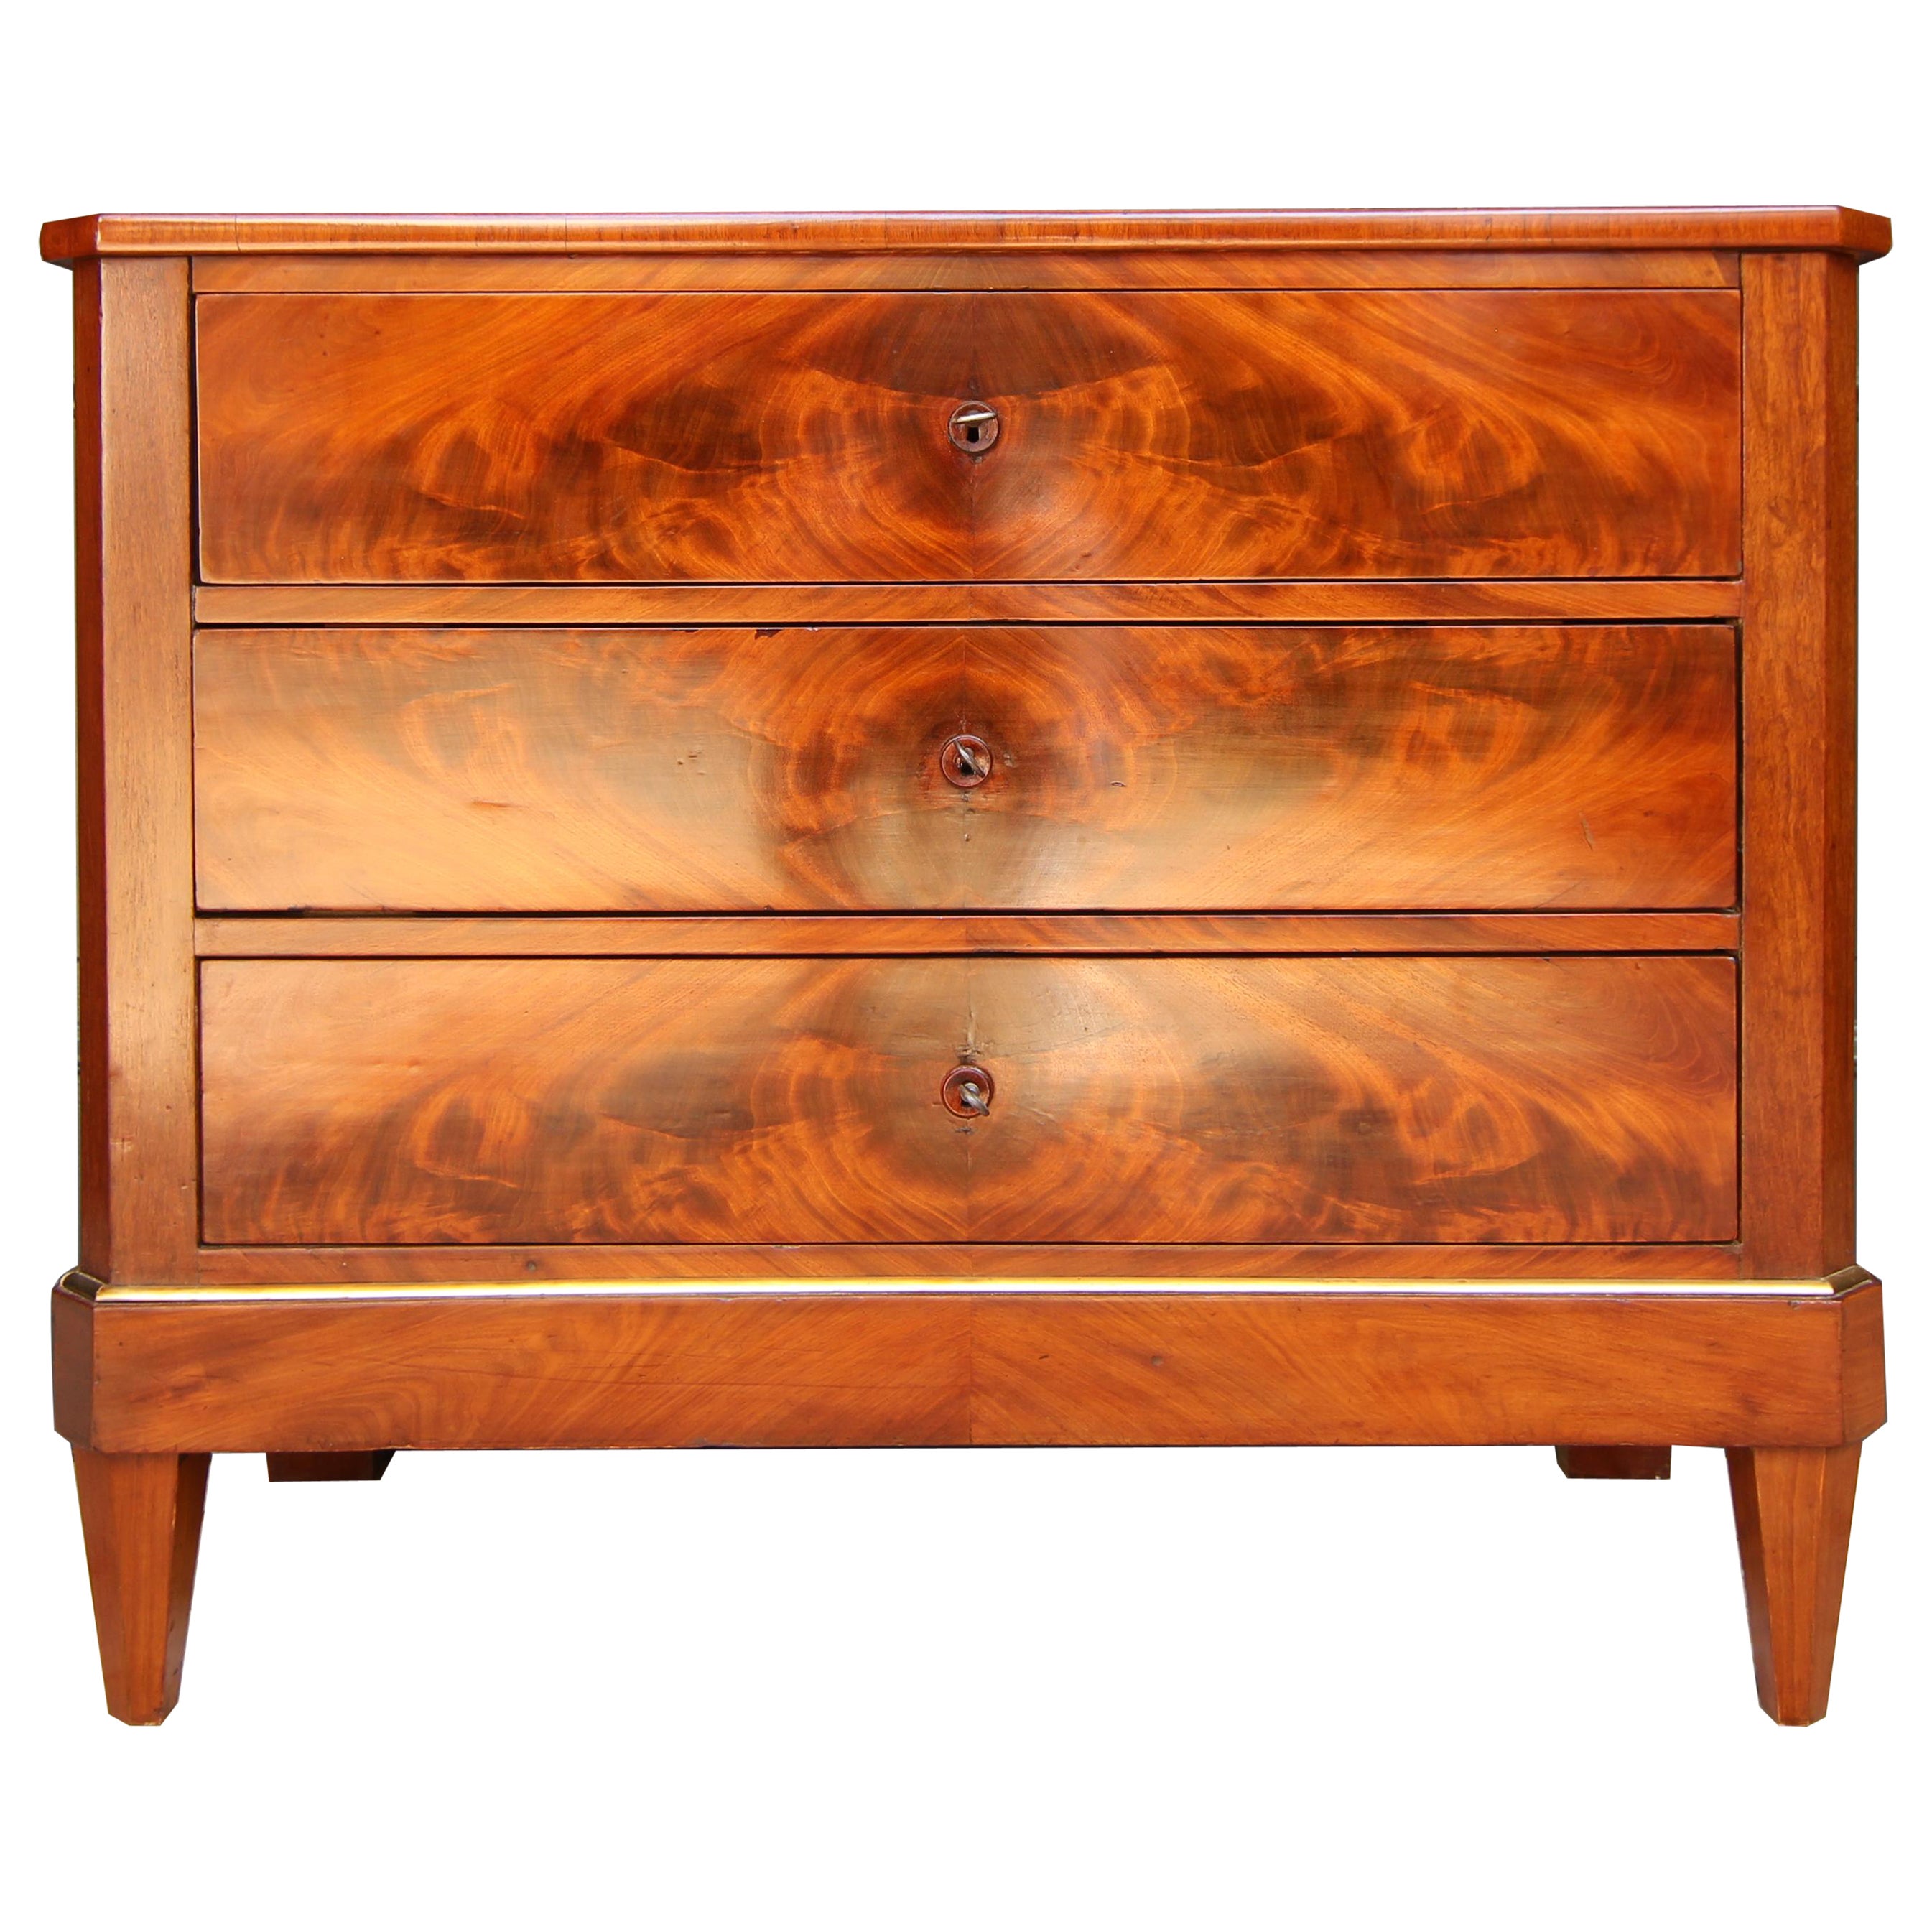 Early 20th Century Mahogany Directoire Style Chest of Drawers